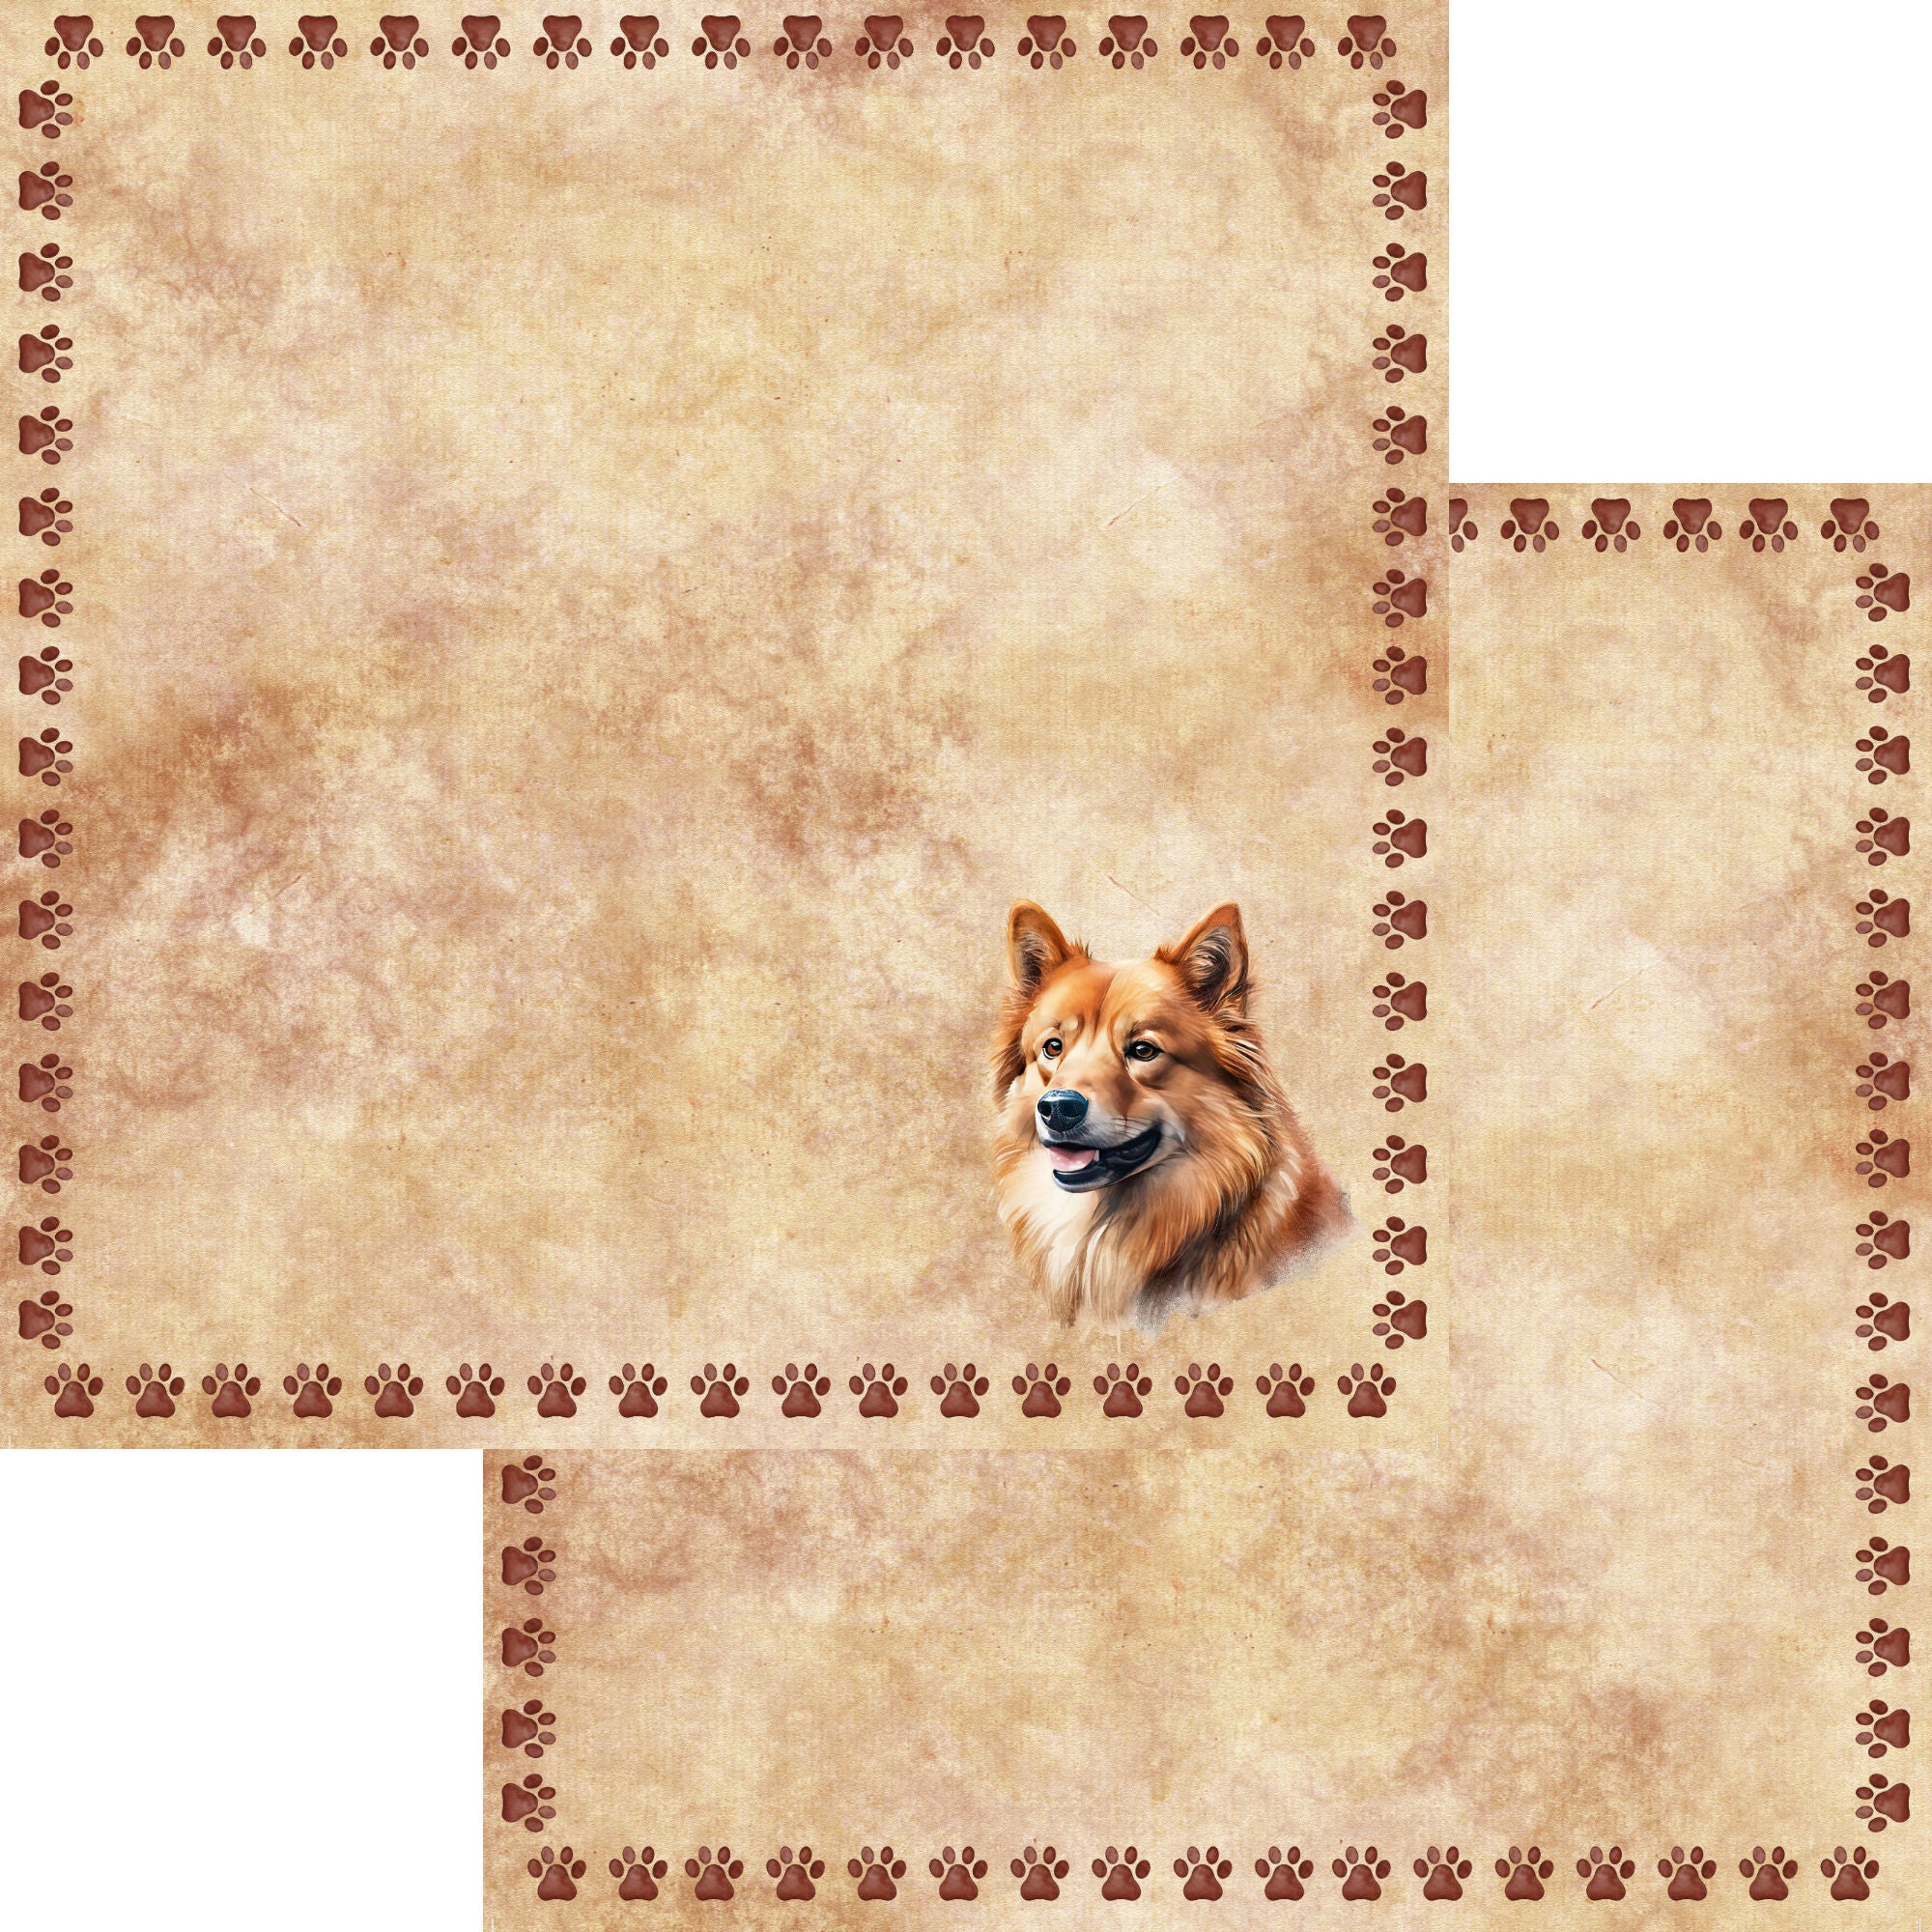 Dog Breeds Collection Corgi 12 x 12 Double-Sided Scrapbook Paper by SSC Designs